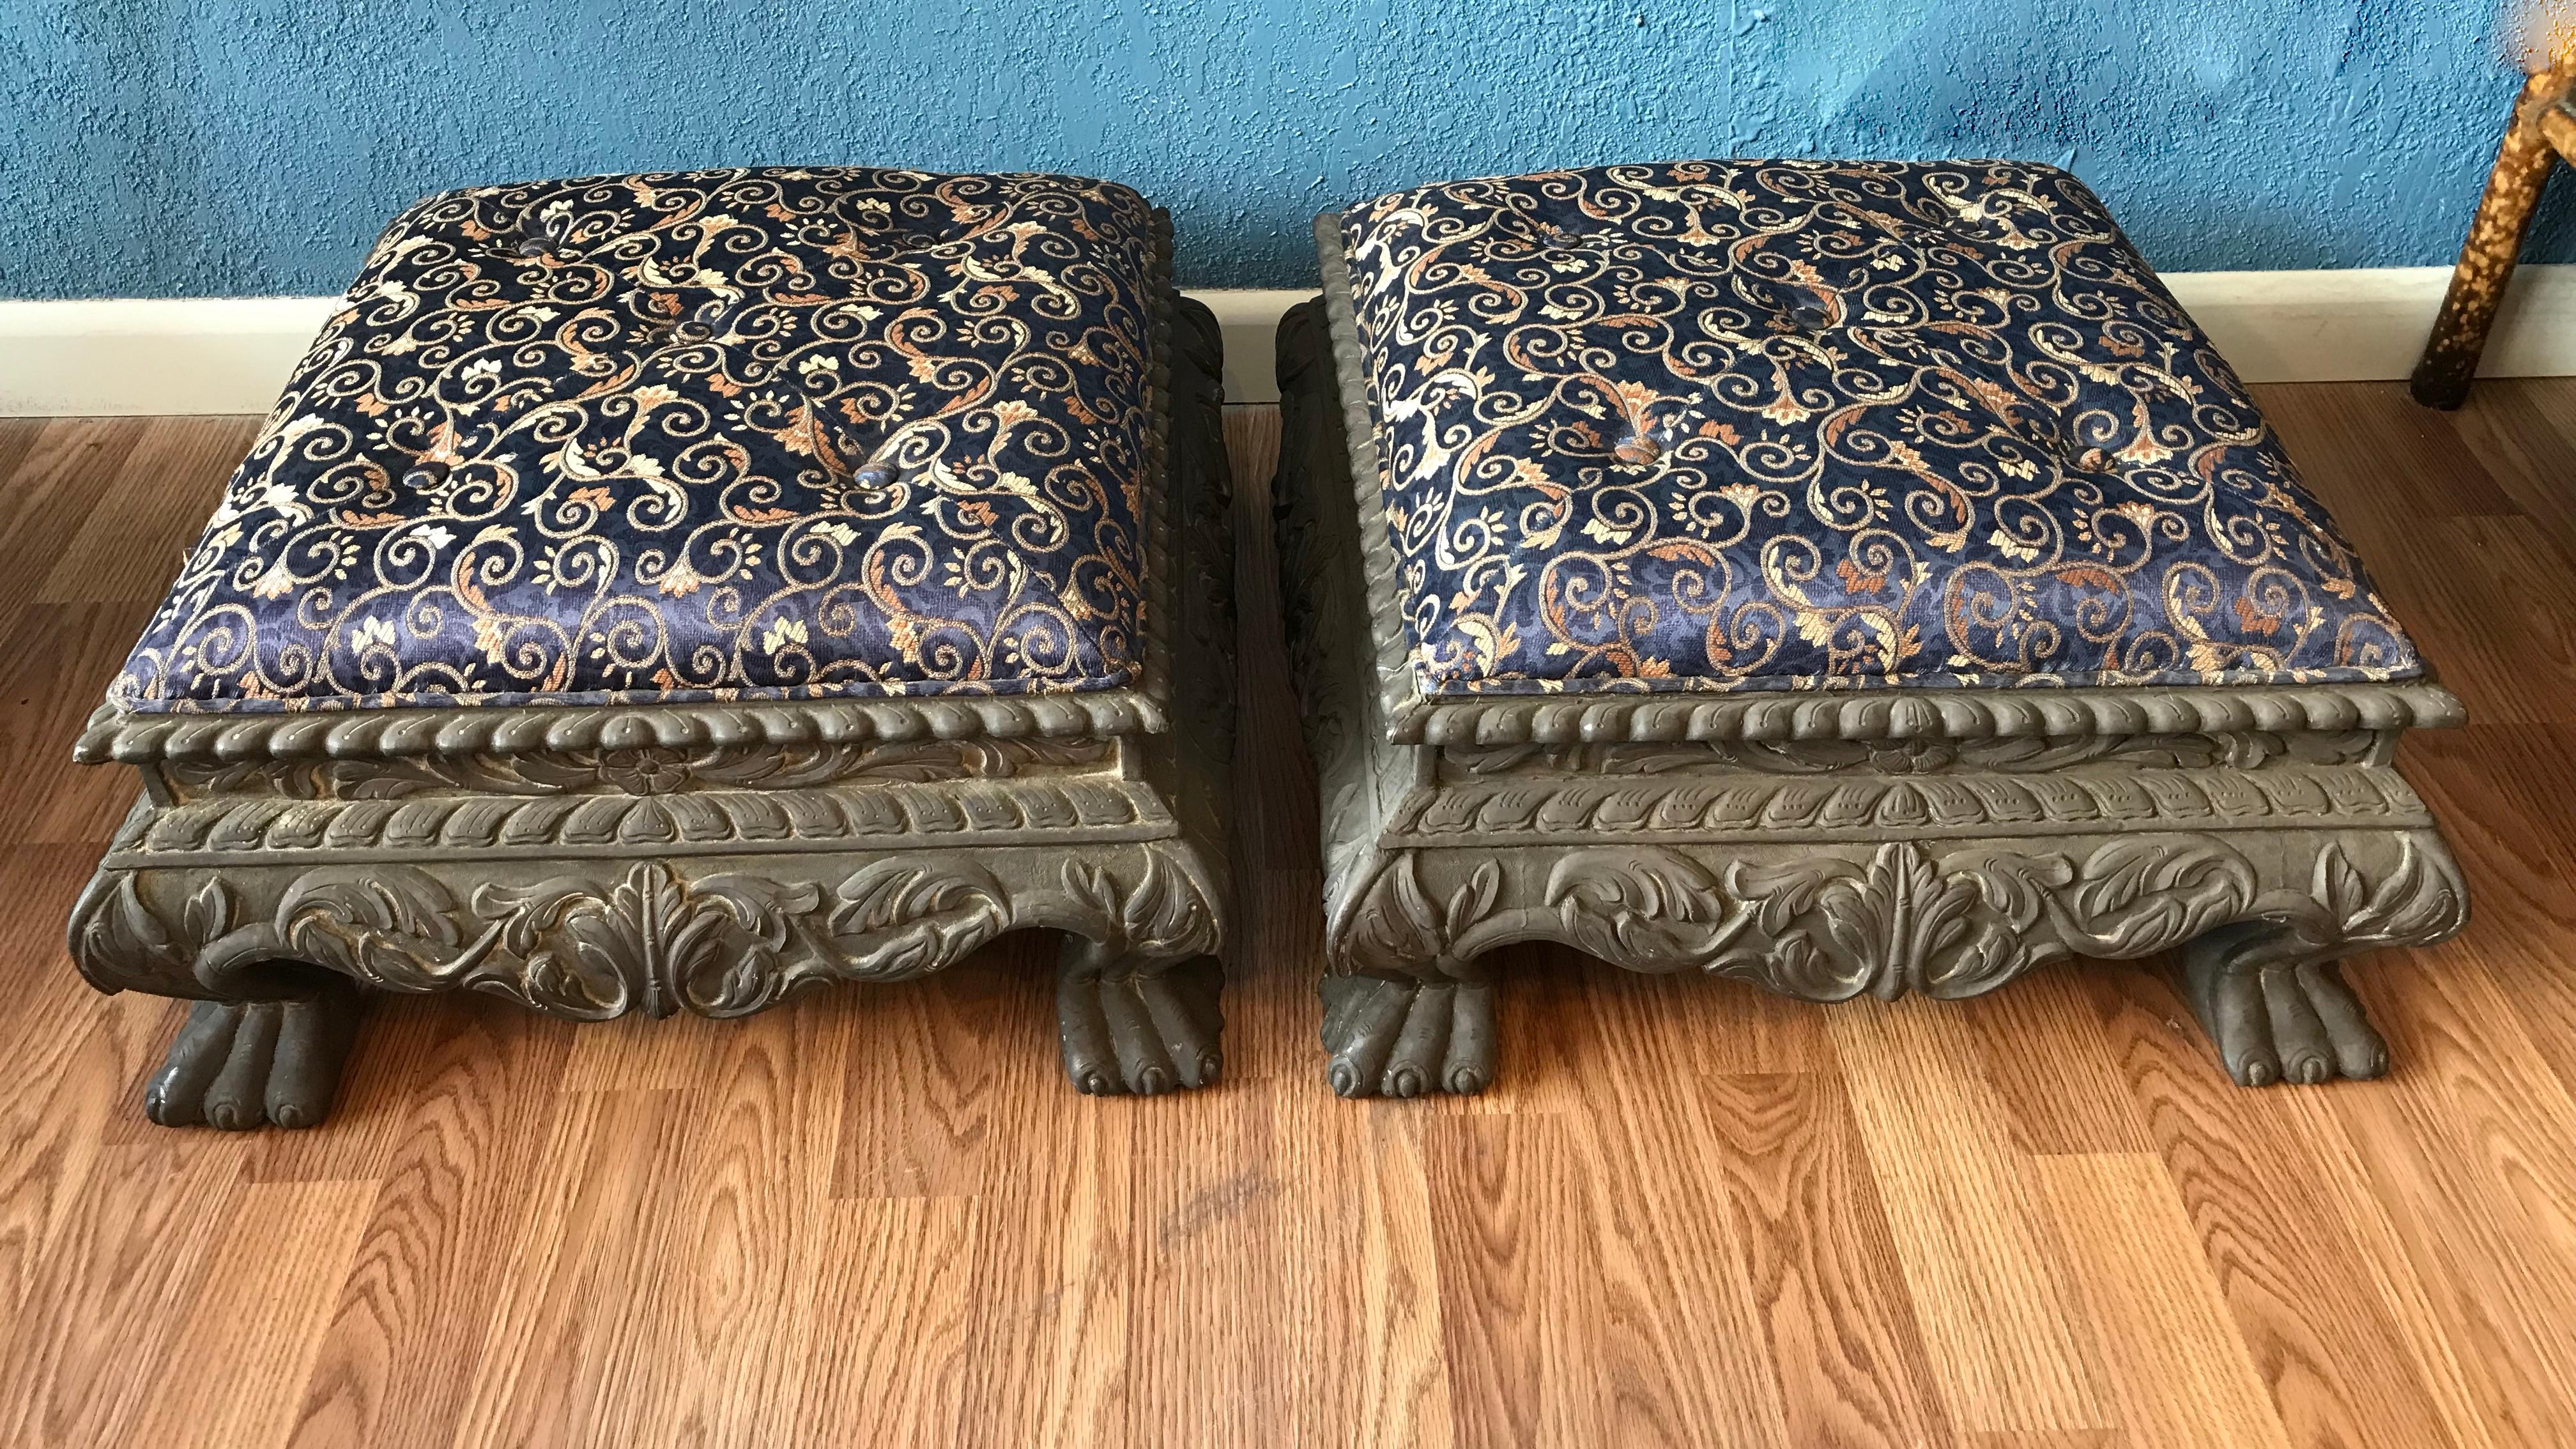 The foot stools are clad in metal and well
defined and detailed. They are accented
with dramatic tiger paw form feet. The frame
work is wood.